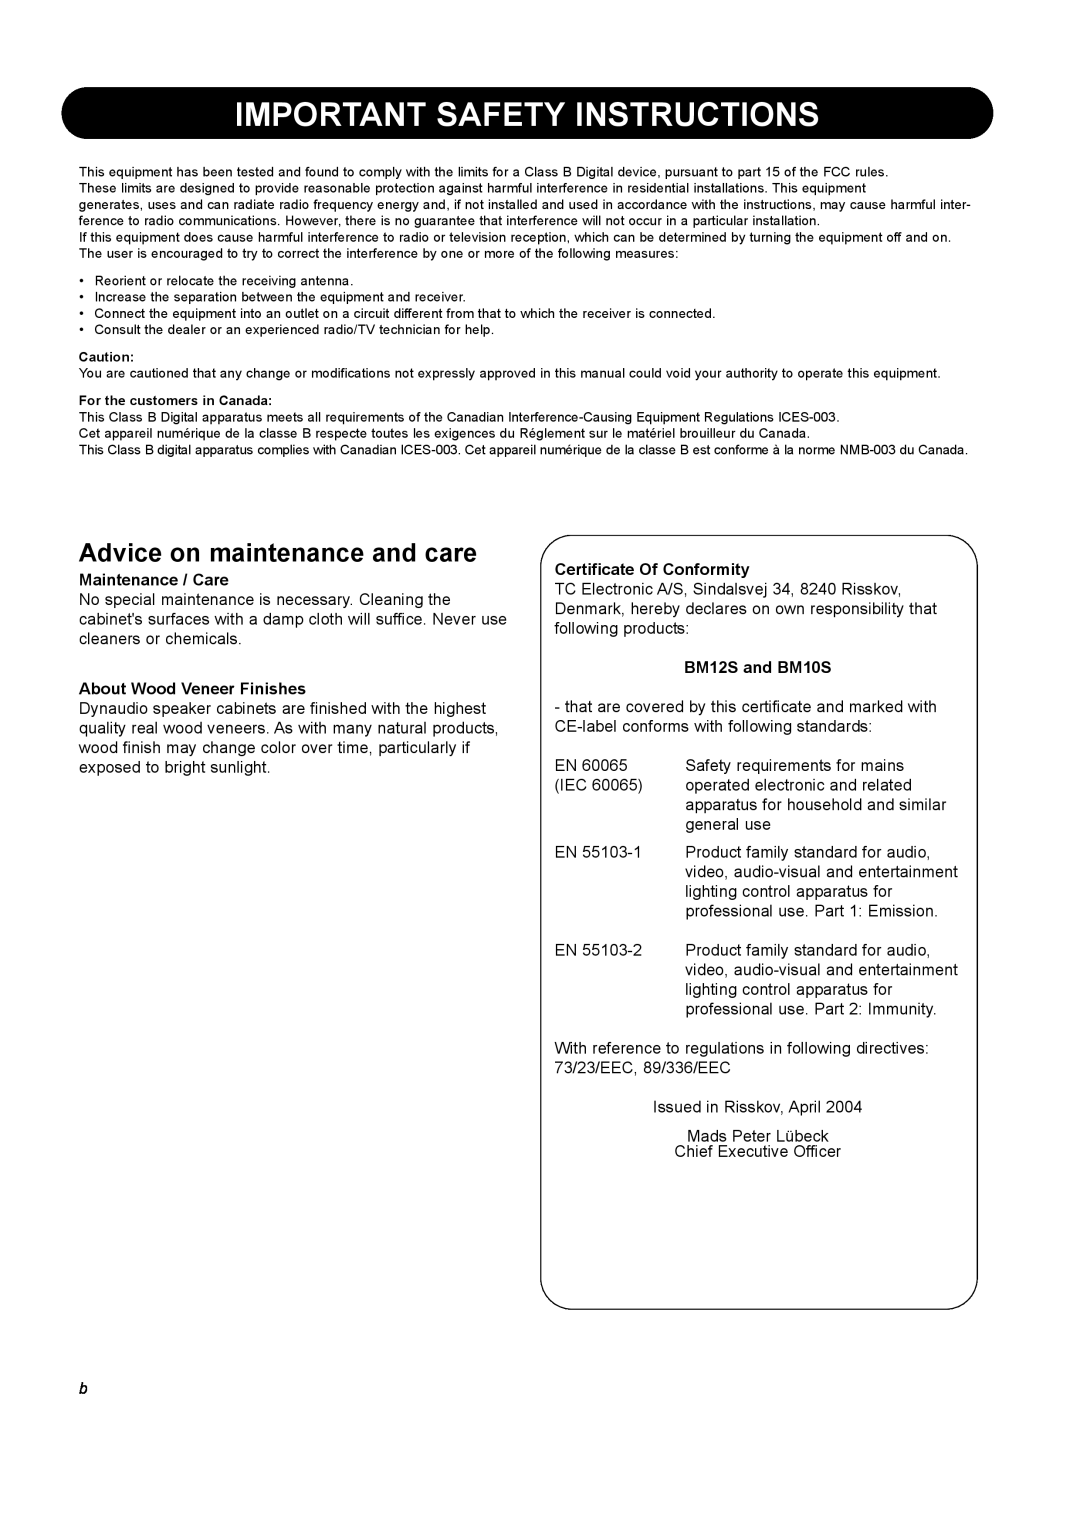 Dynaudio manual Advice on maintenance and care, Important Safety Instructions, Maintenance / Care, BM12S and BM10S 